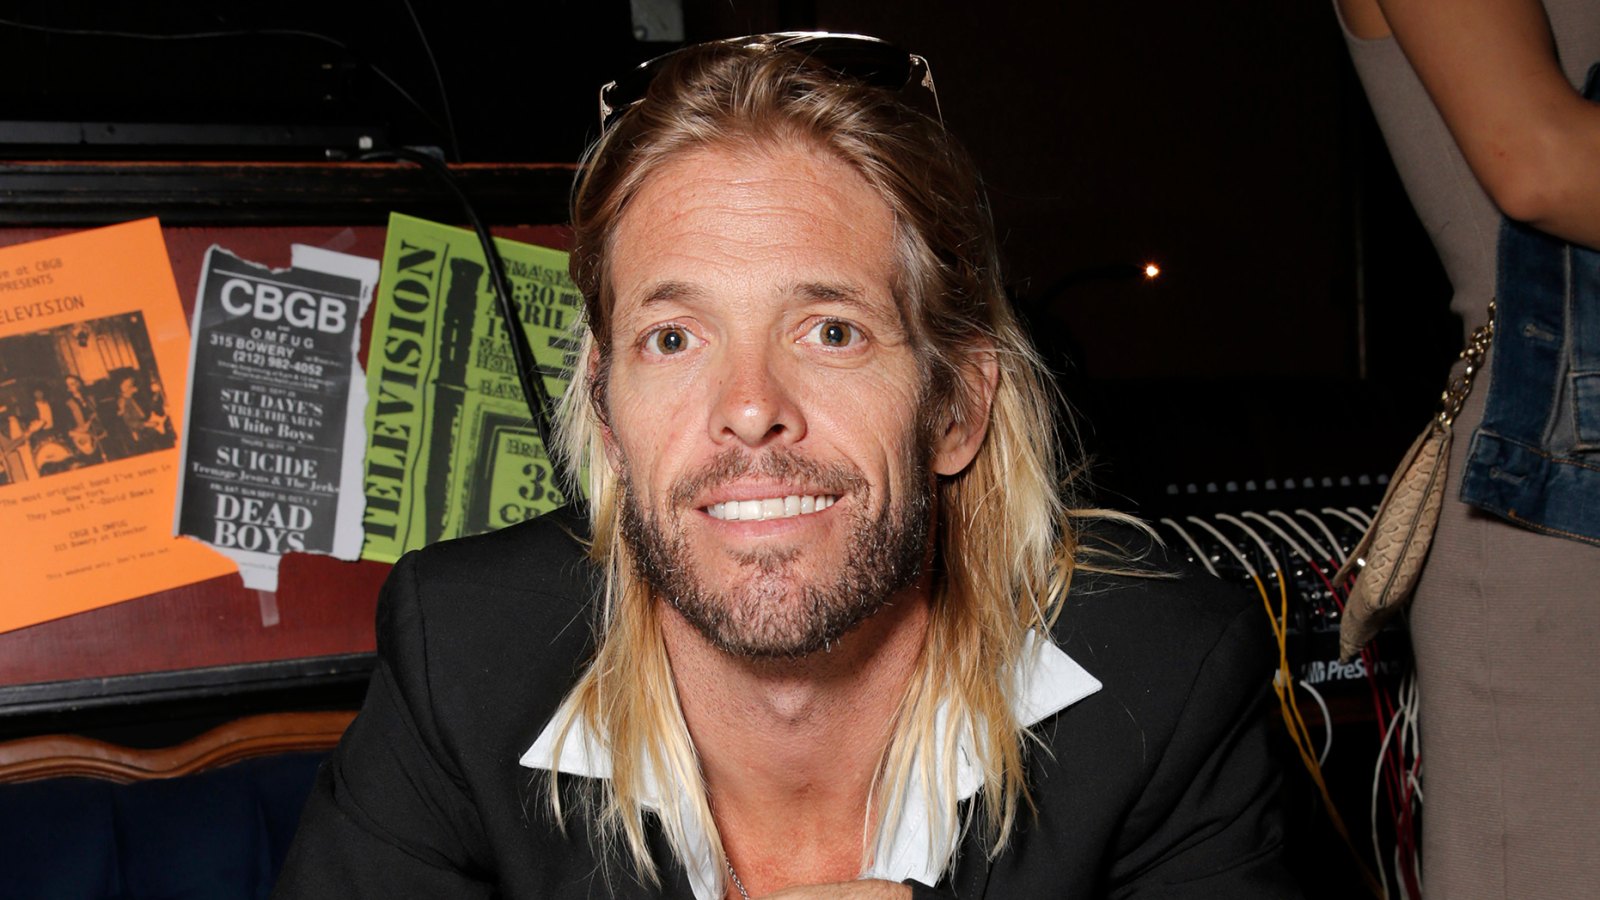 Foo Fighters Drummer Taylor Hawkins Had Chest Pain Before His Death, Colombia Officials Say